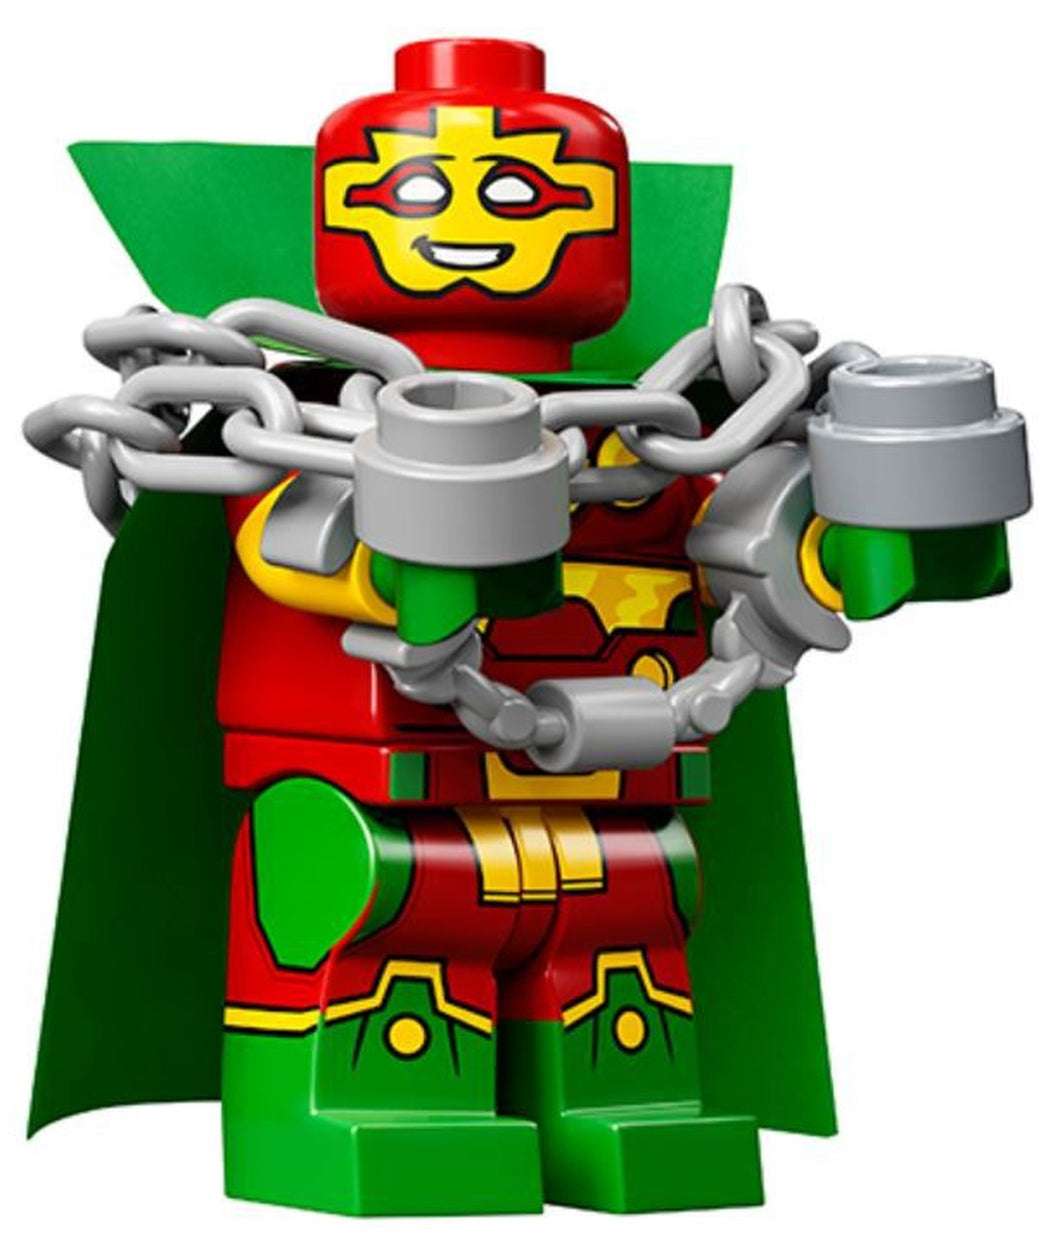 LEGO DC Super Hero Series Mister Miracle Collectible Minifigure 71026